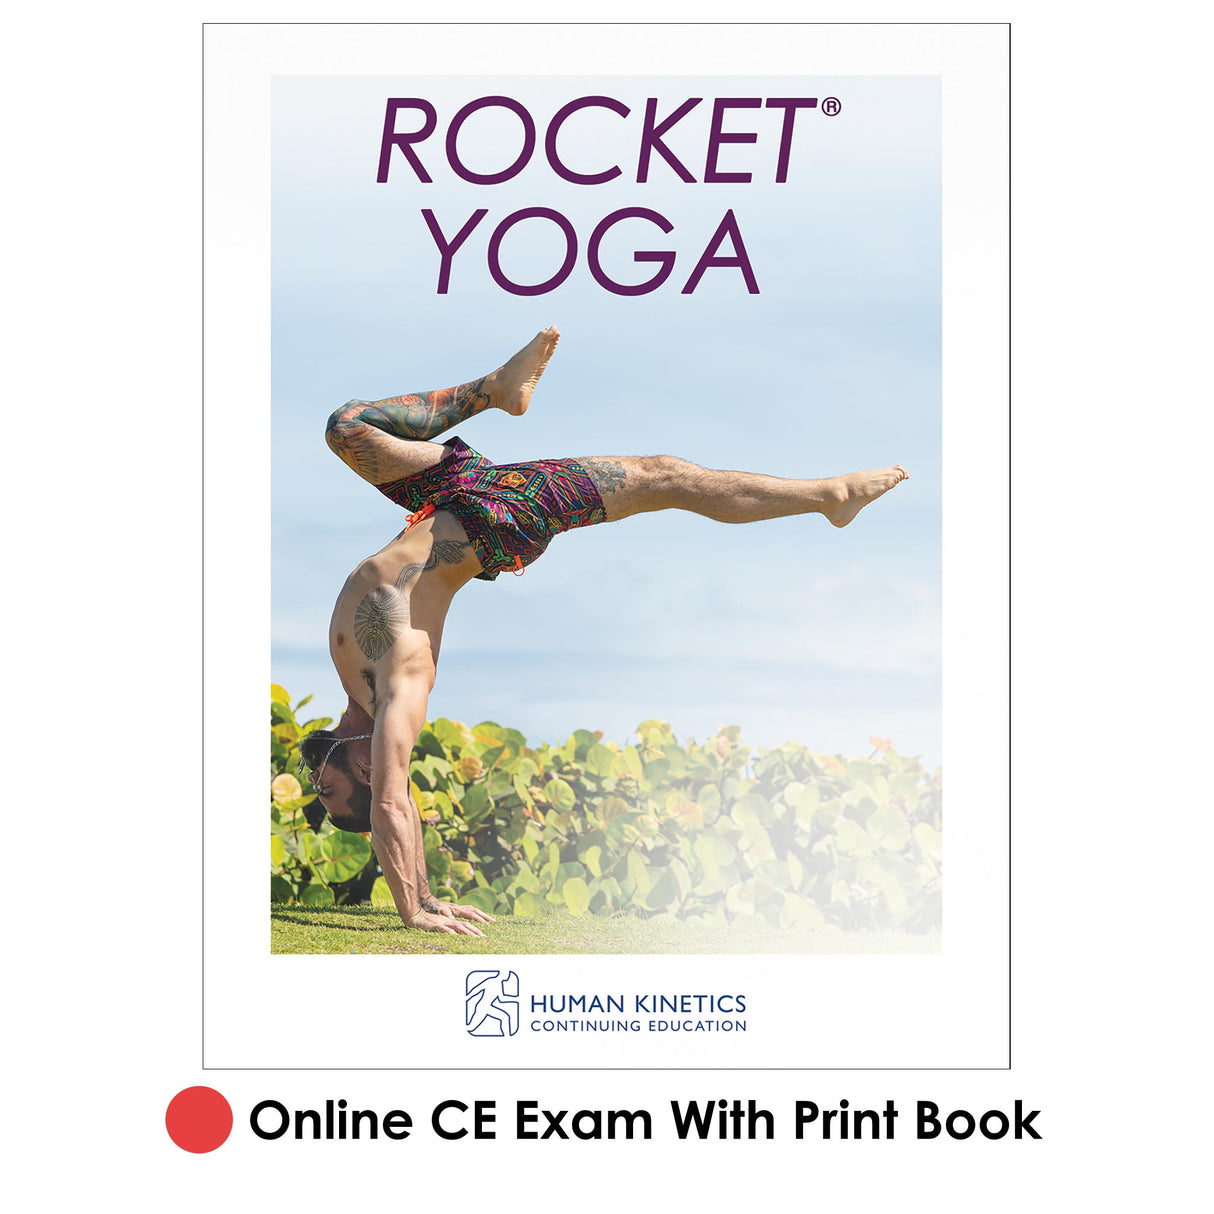 Rocket® Yoga Online CE Exam With Print Book